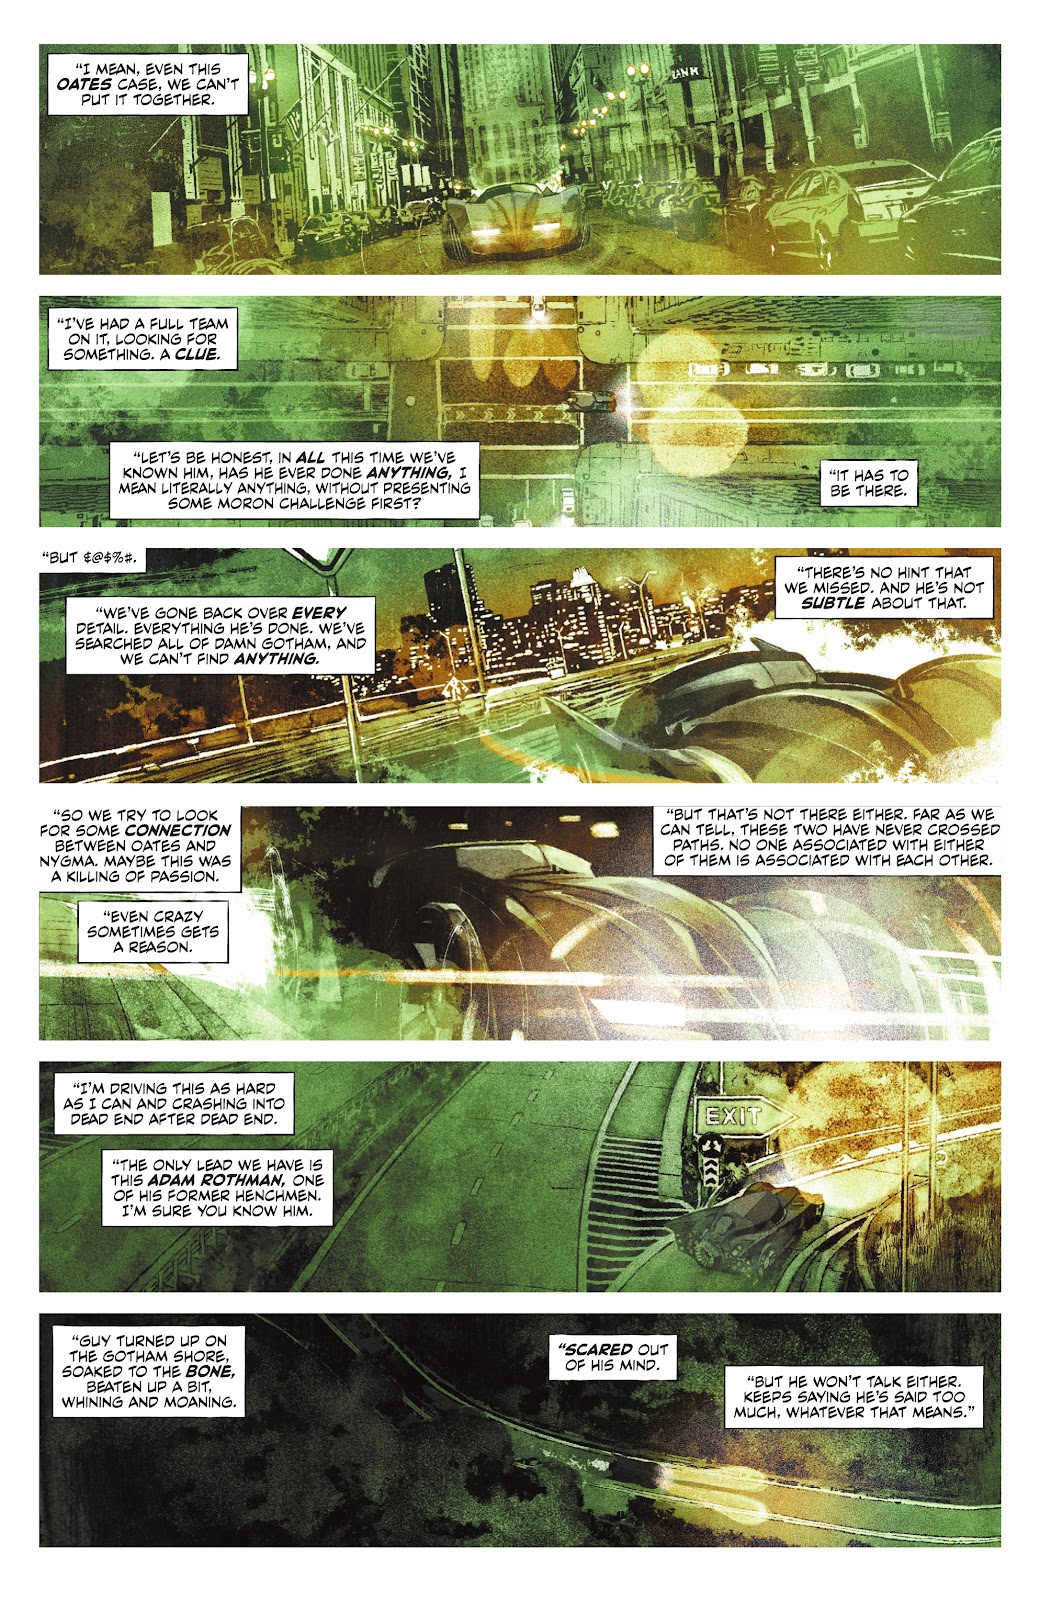 Batman: One Bad Day - The Riddler issue 1 - Page 26